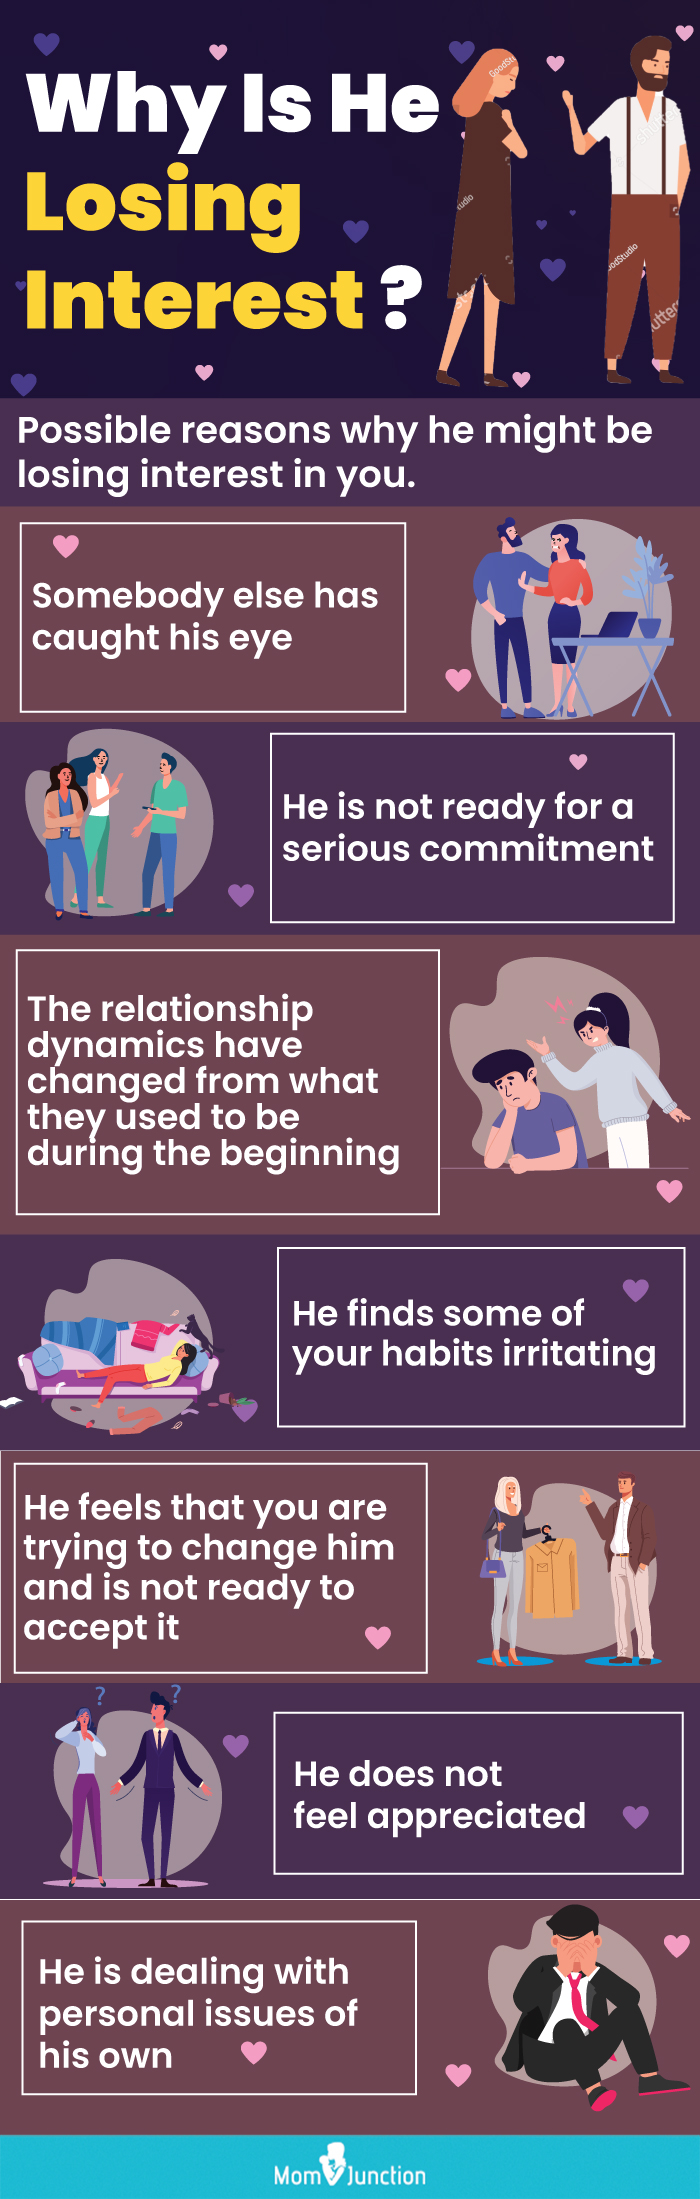 why is he losing interest (infographic)